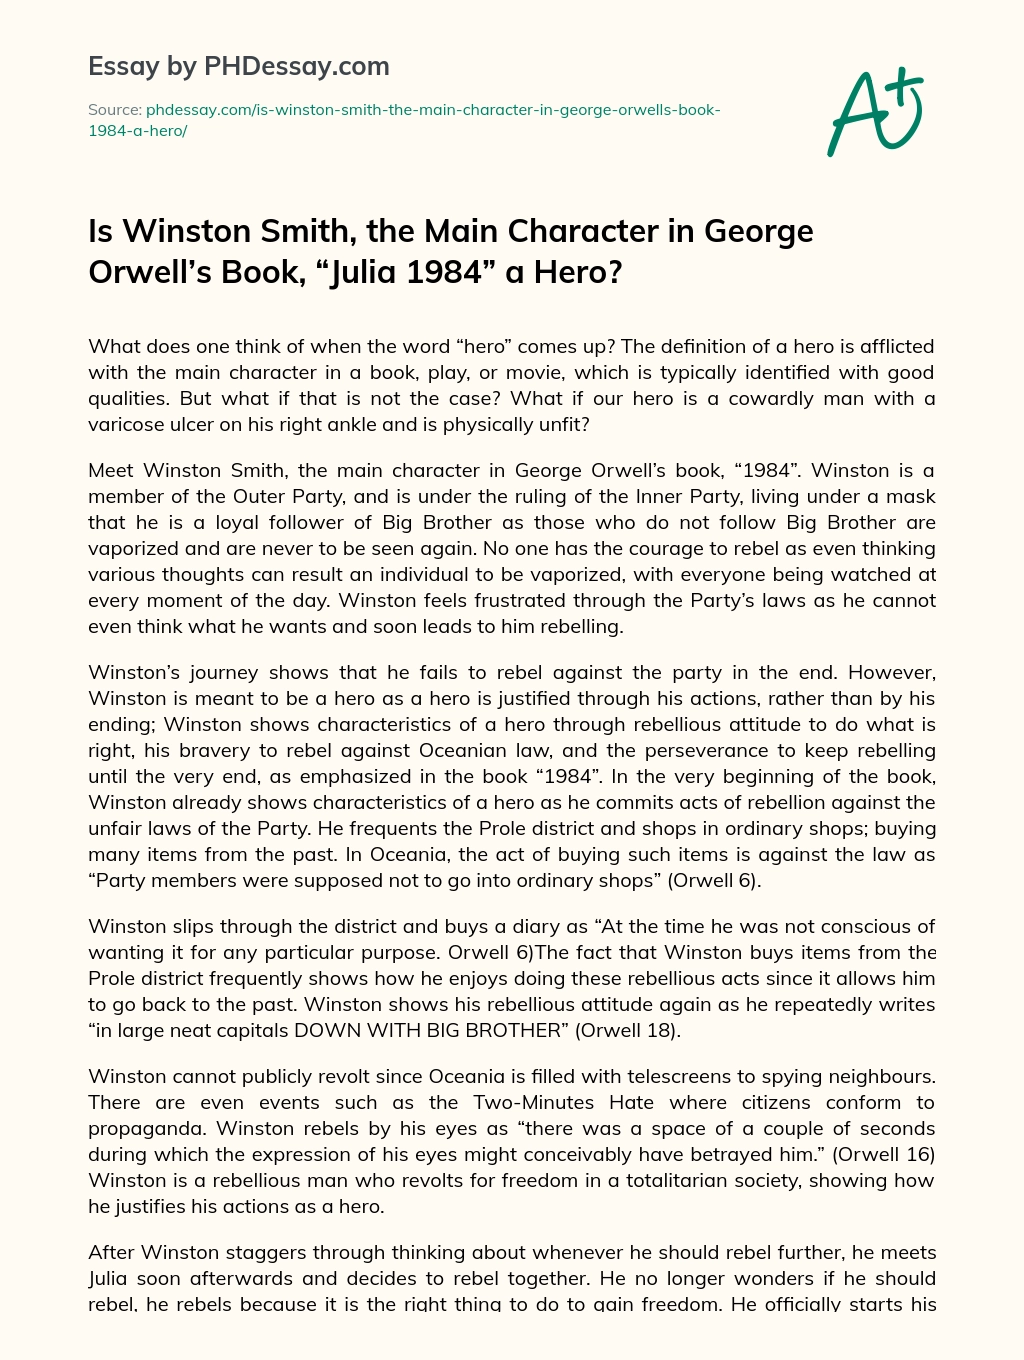 Is Winston Smith, the Main Character in George Orwell’s Book, “Julia 1984” a Hero? essay